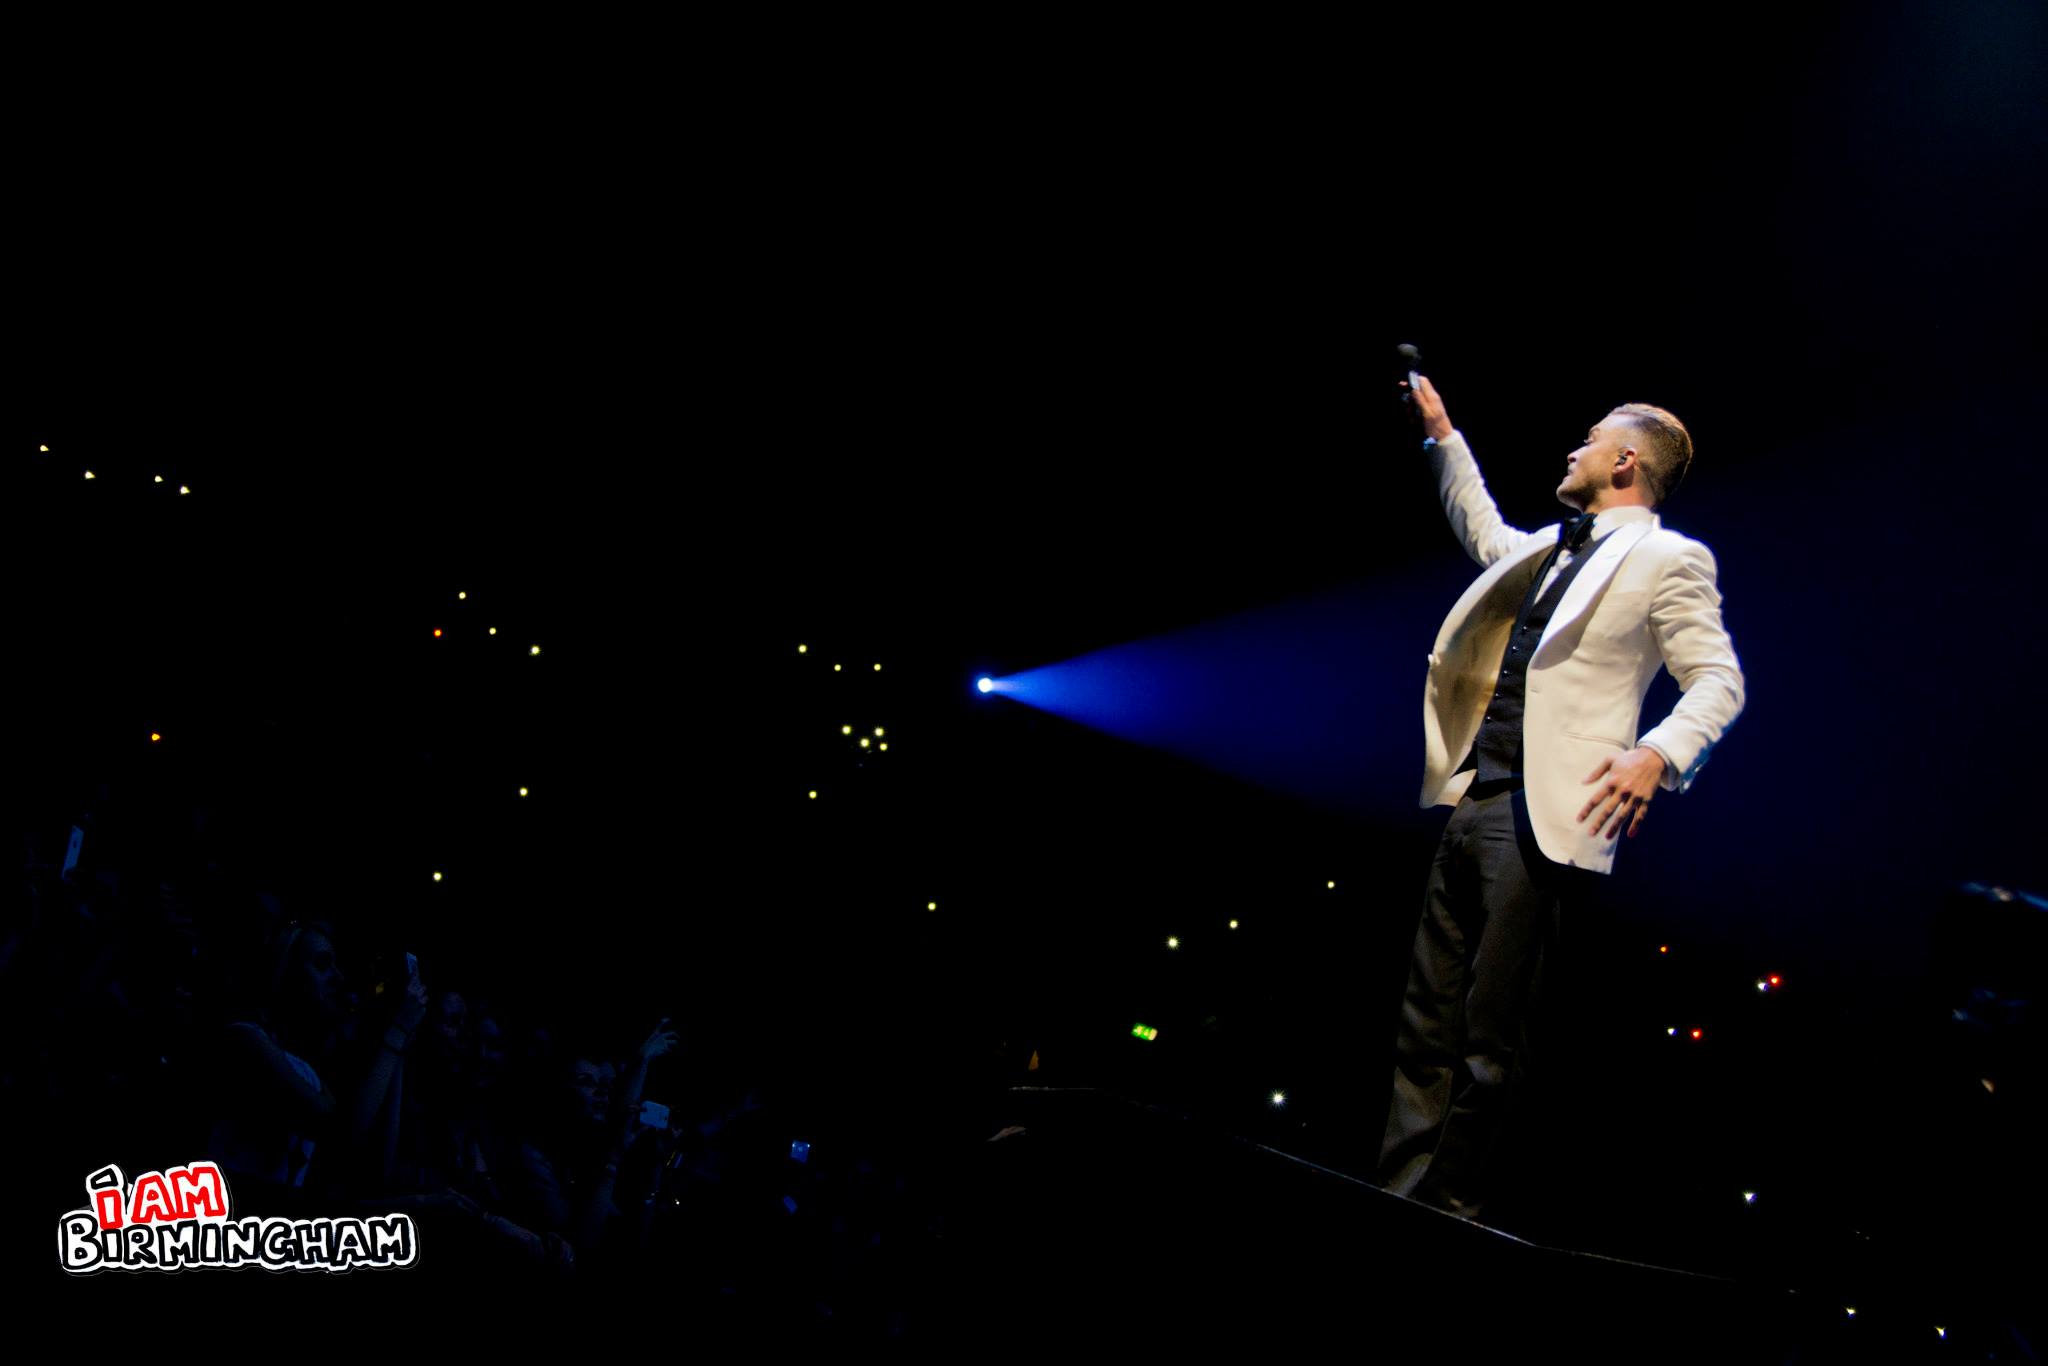 Justin Timberlake thrills the eager crowd at the LG Arena in Birmingham (Photo: Jack Kirby)